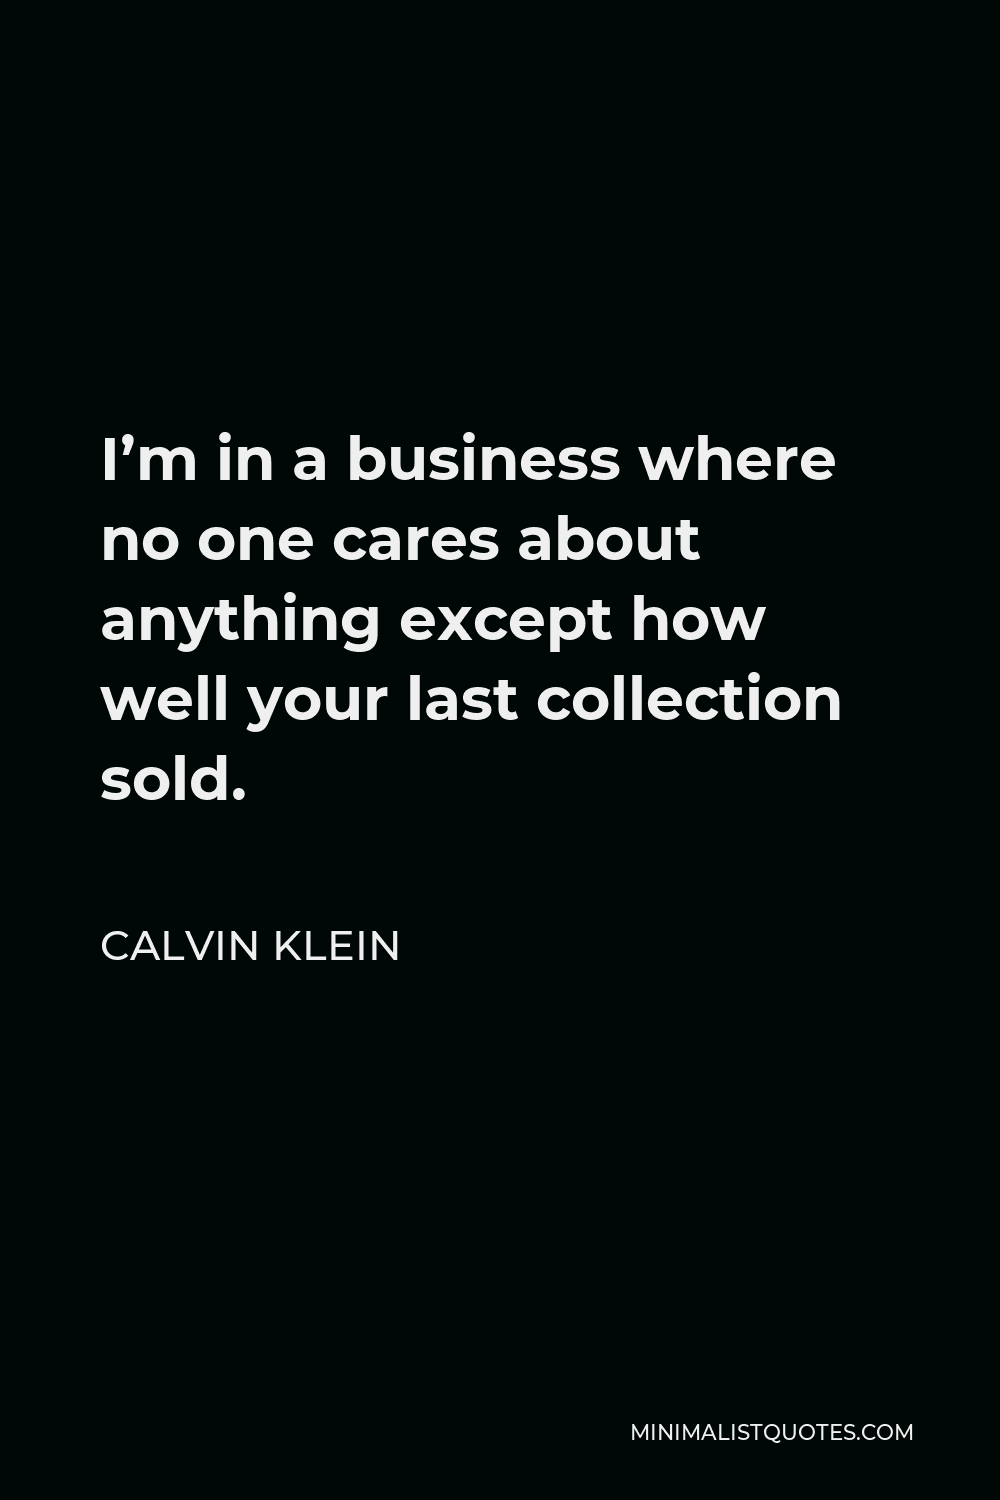 Calvin Klein Quote - I’m in a business where no one cares about anything except how well your last collection sold.